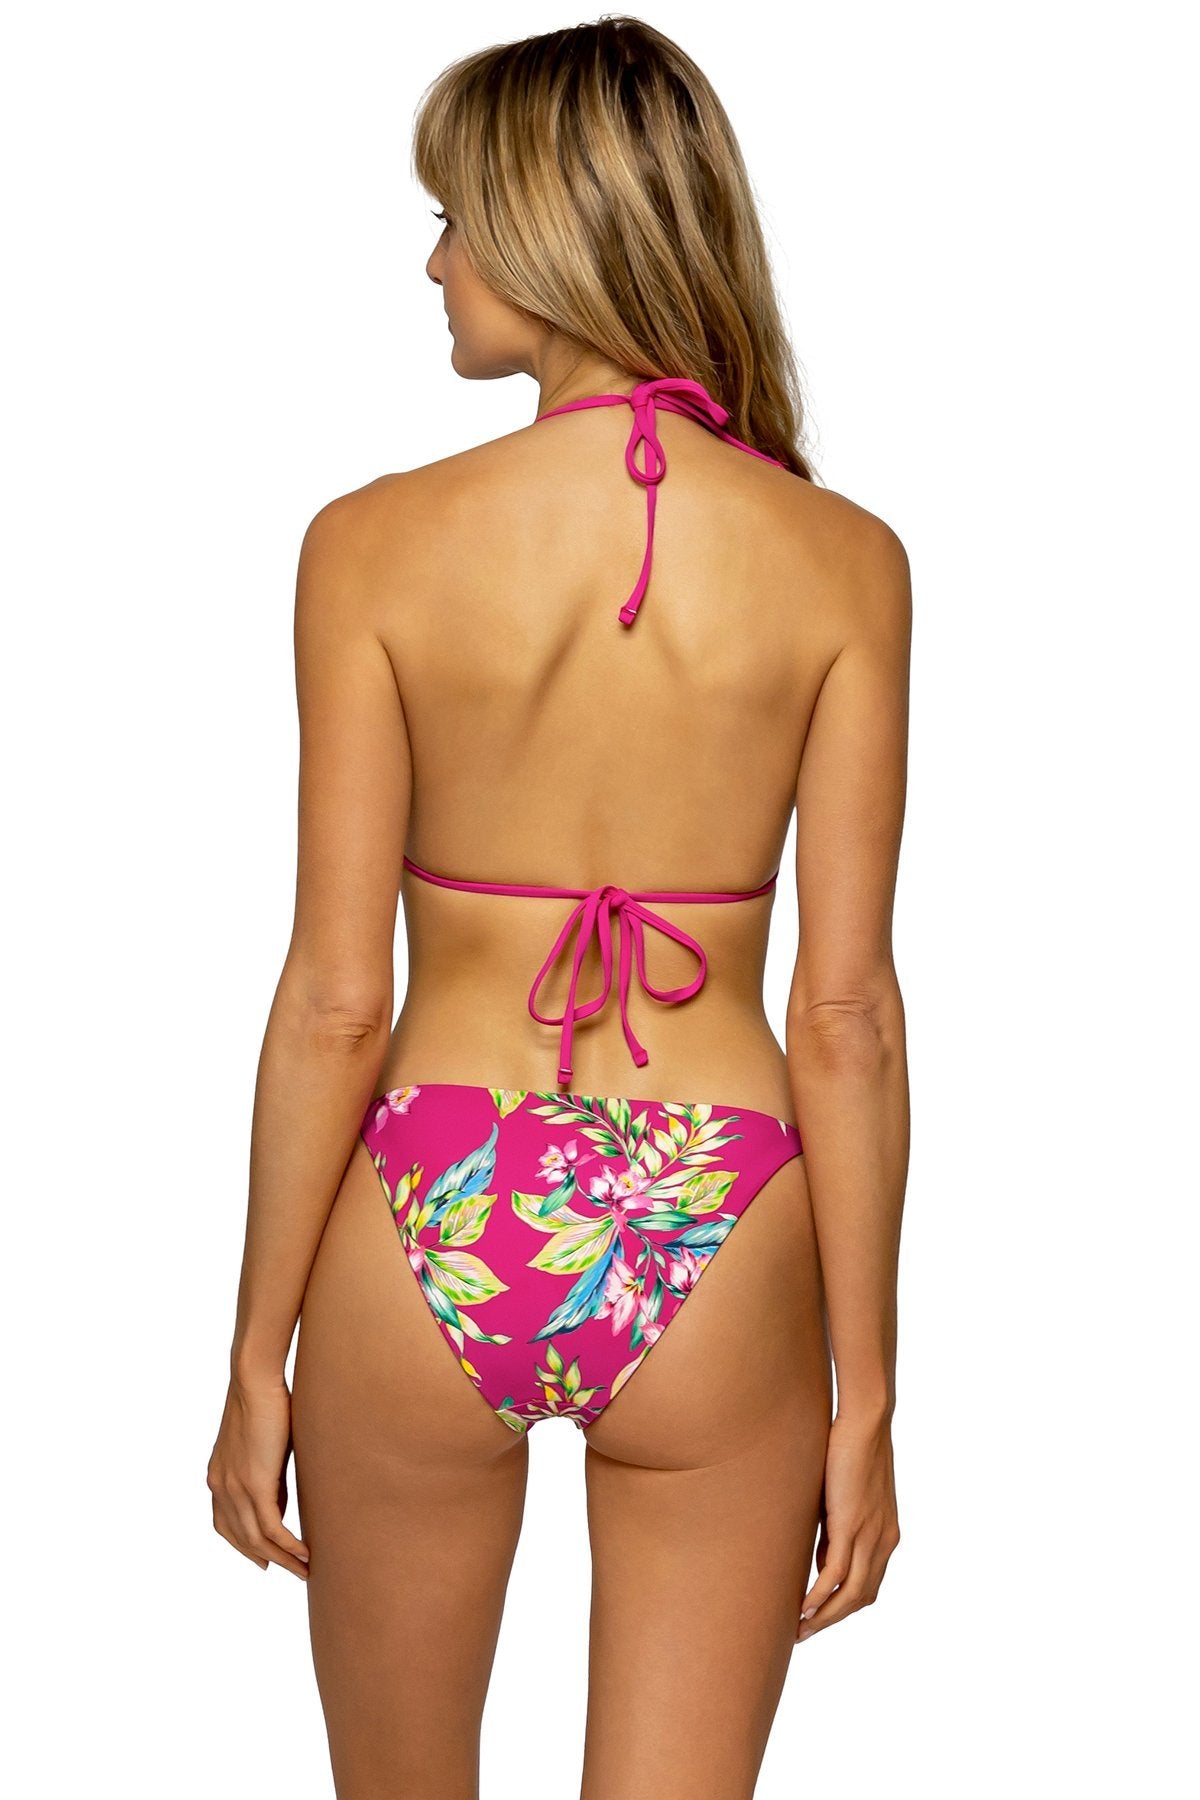 Sunsets "Brands,Swimwear" Sunsets Orchid Oasis California Dreamin' Bottom